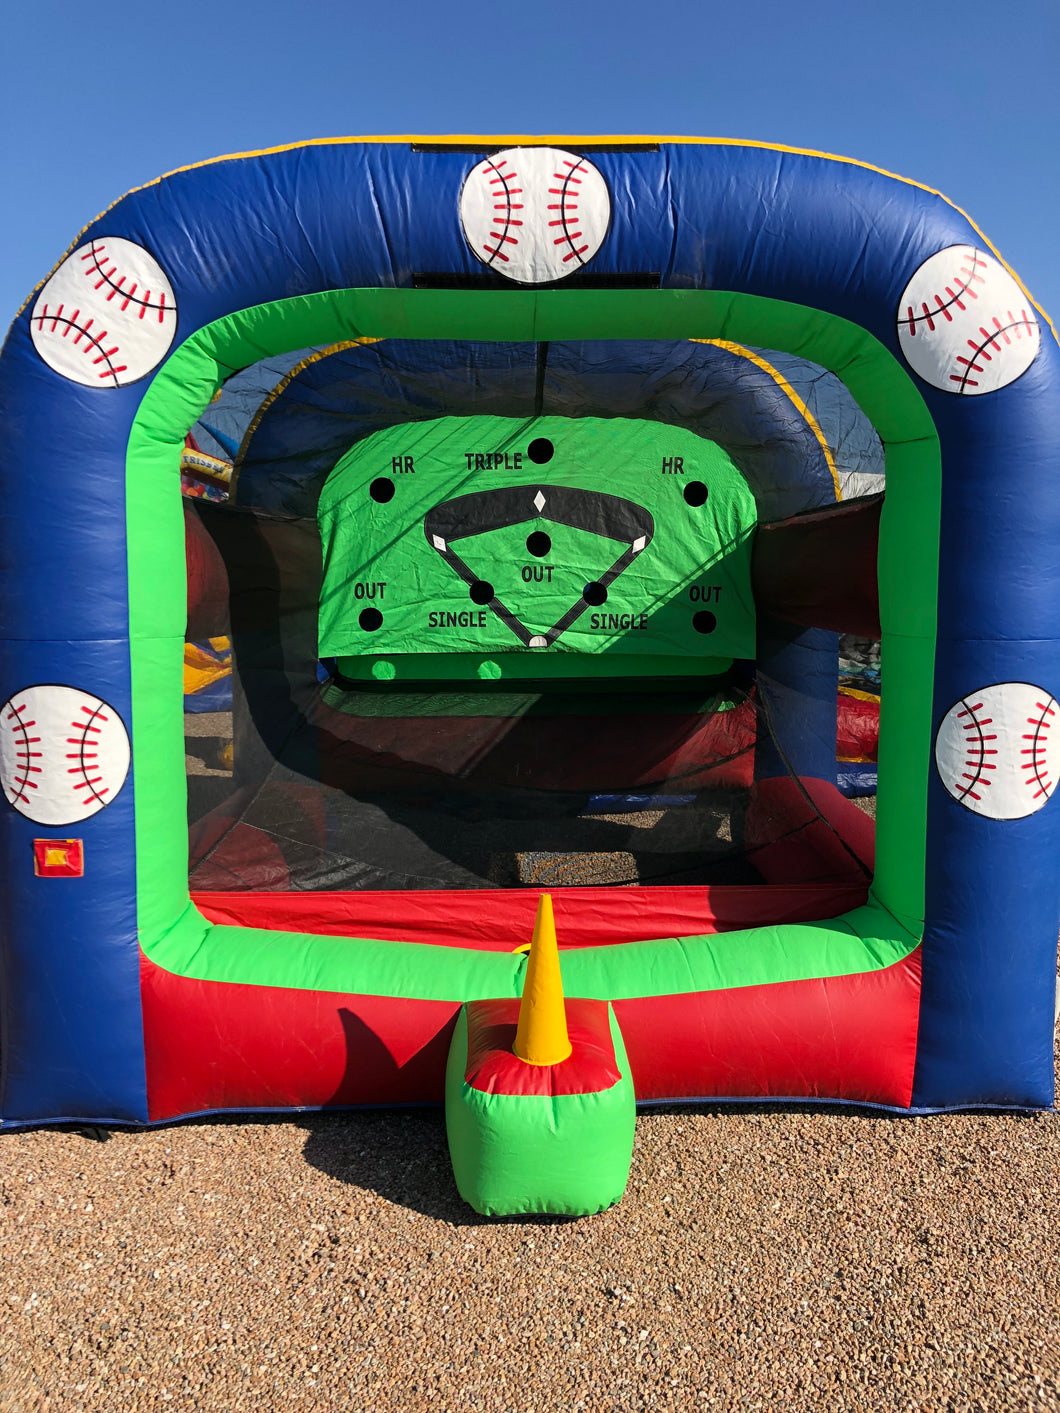 BASEBALL HOME RUN DERBY INFLATABLE GAME